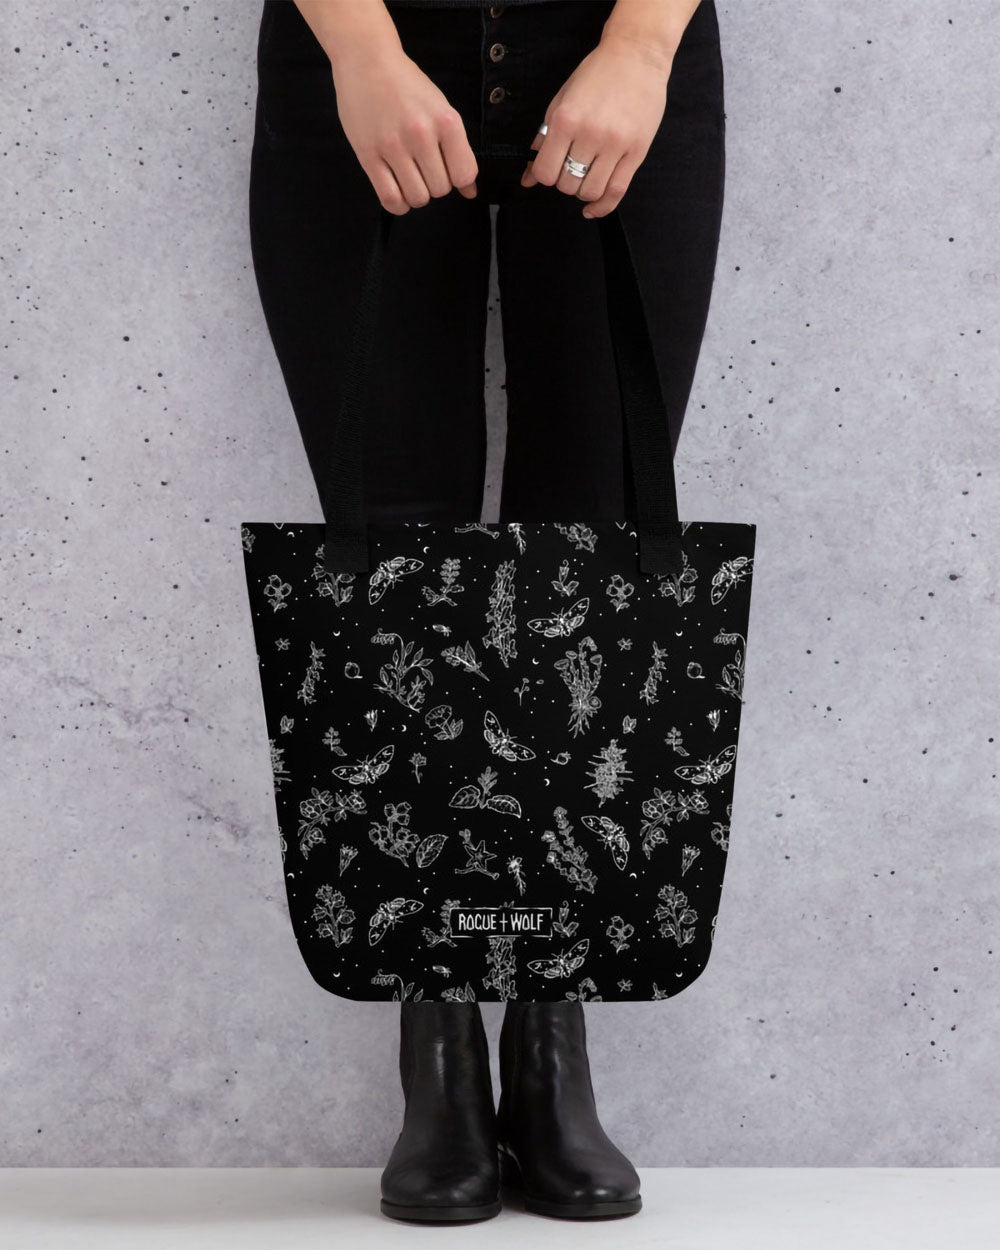 Nightshade Tote Bag -  Vegan Gothic Fashion - Alternative Occult Ethical Style - On Demand Eco-friendly Sustainable Product